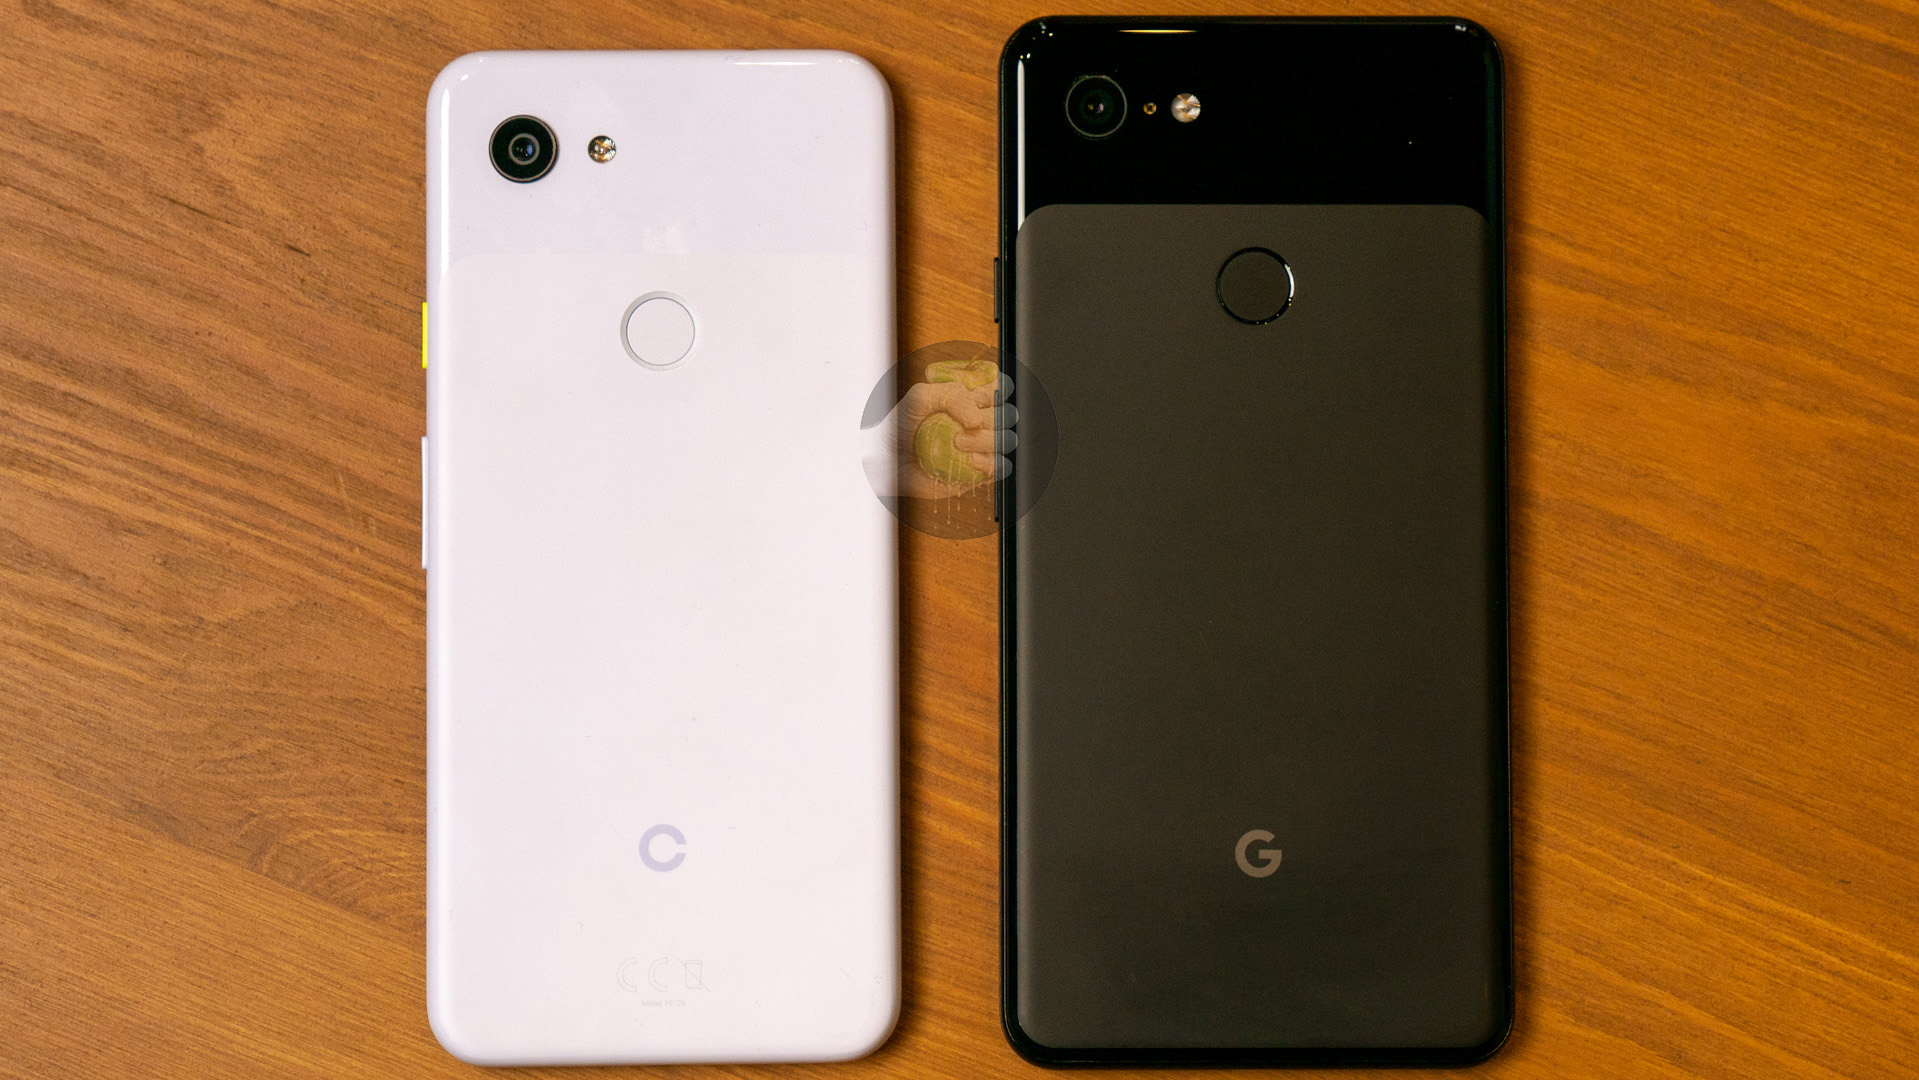 Black Google Pixel 3 next to a white version of the anticipated &quot;Google Pixel 3 Lite&quot; expected to be released by Google in 2019